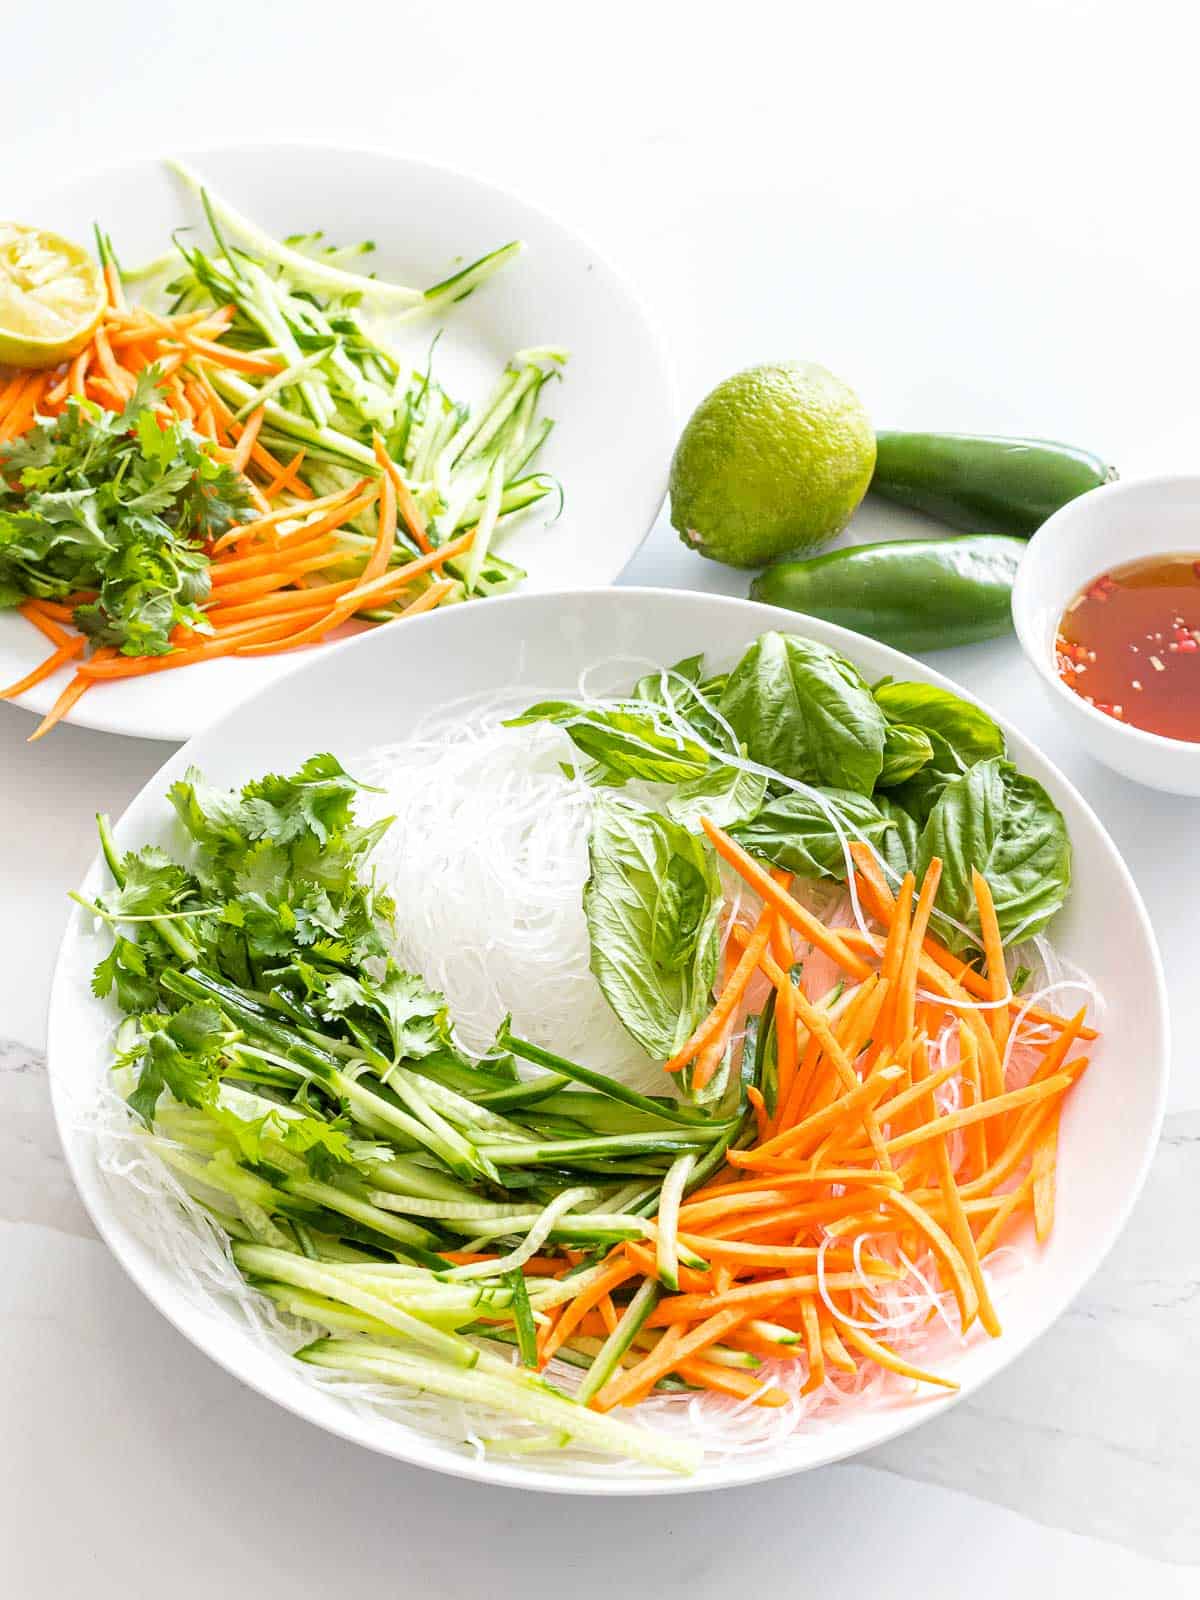 Vietnamese noodle salad with vermicelli rice noodles, basil, cilantro, carrots, and cucumbers next to a bowl of dressing.